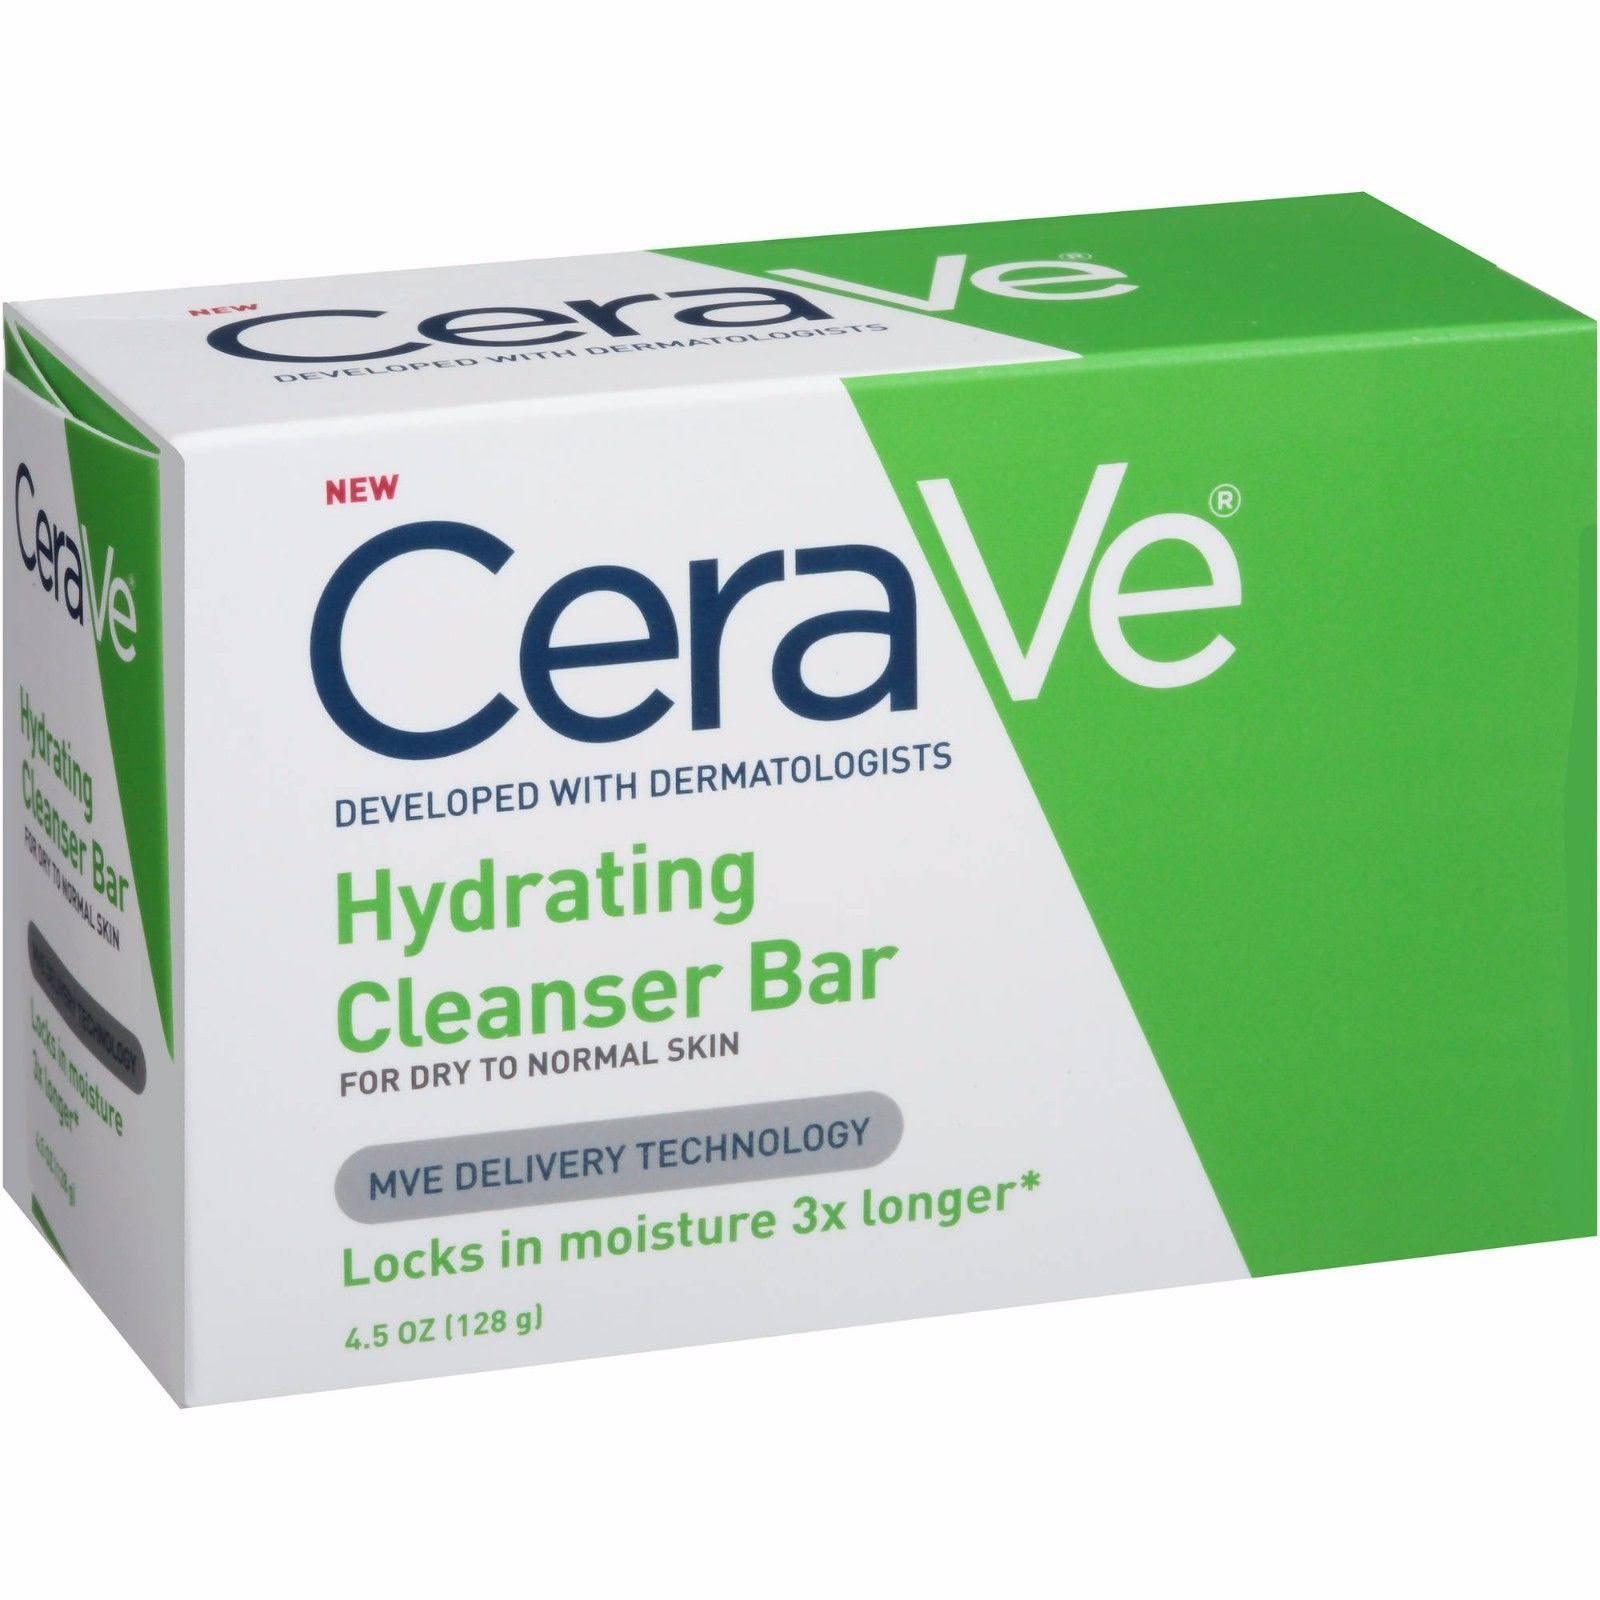 Cerave Hydrating Cleanser Bar - 4.5oz, for Dry to Normal Skin